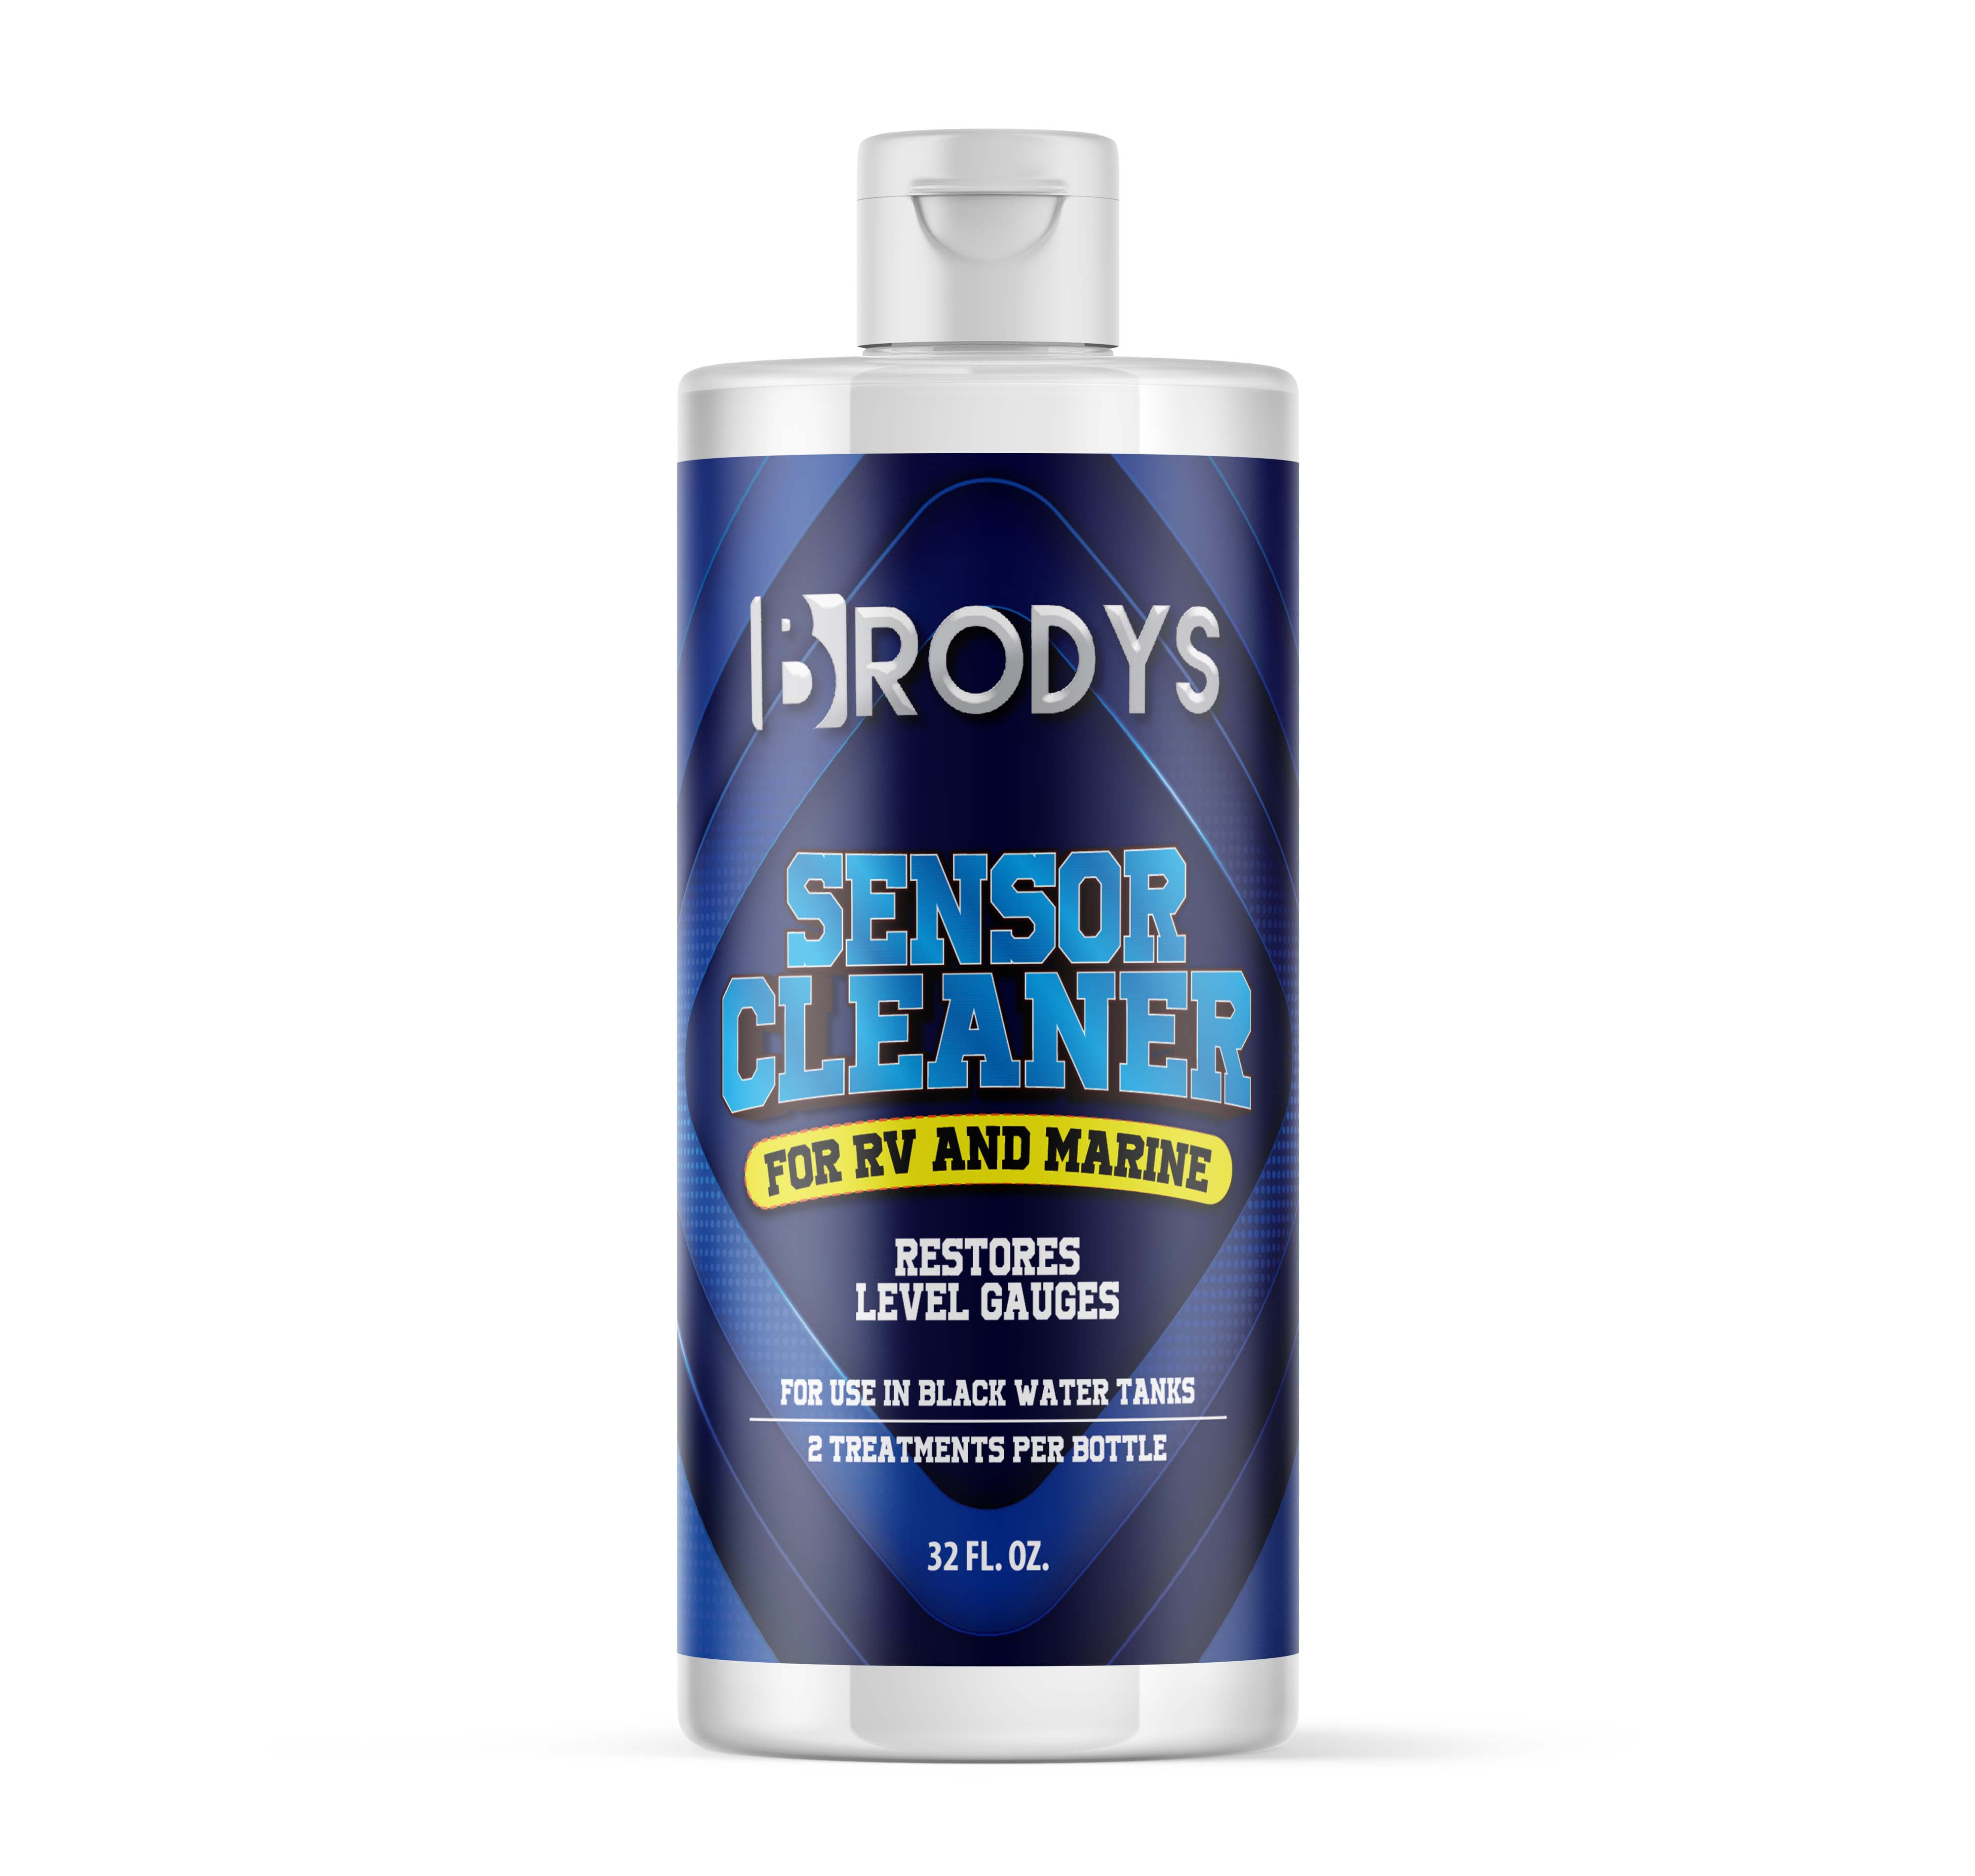 BRODYS - RV and Marine Sensor Cleaner Liquid for Black Water Holding Tanks  ( Fix your sensors, Clear clogs and toilet back ups, bio-enzymatic formula)  32oz 